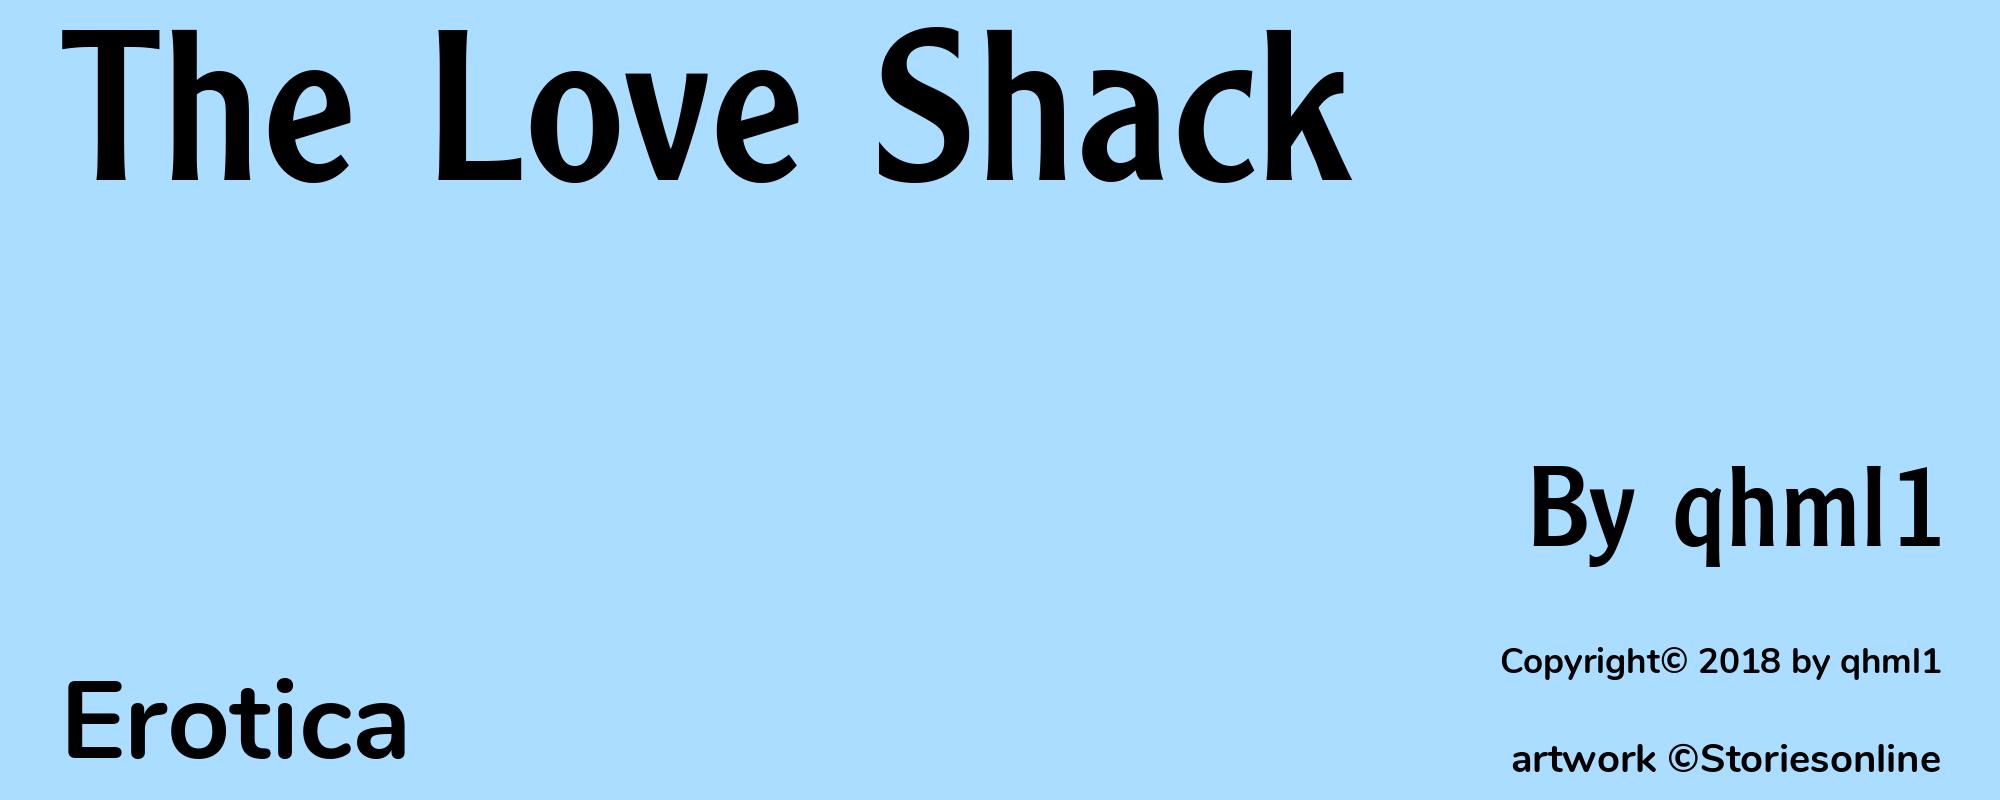 The Love Shack - Cover